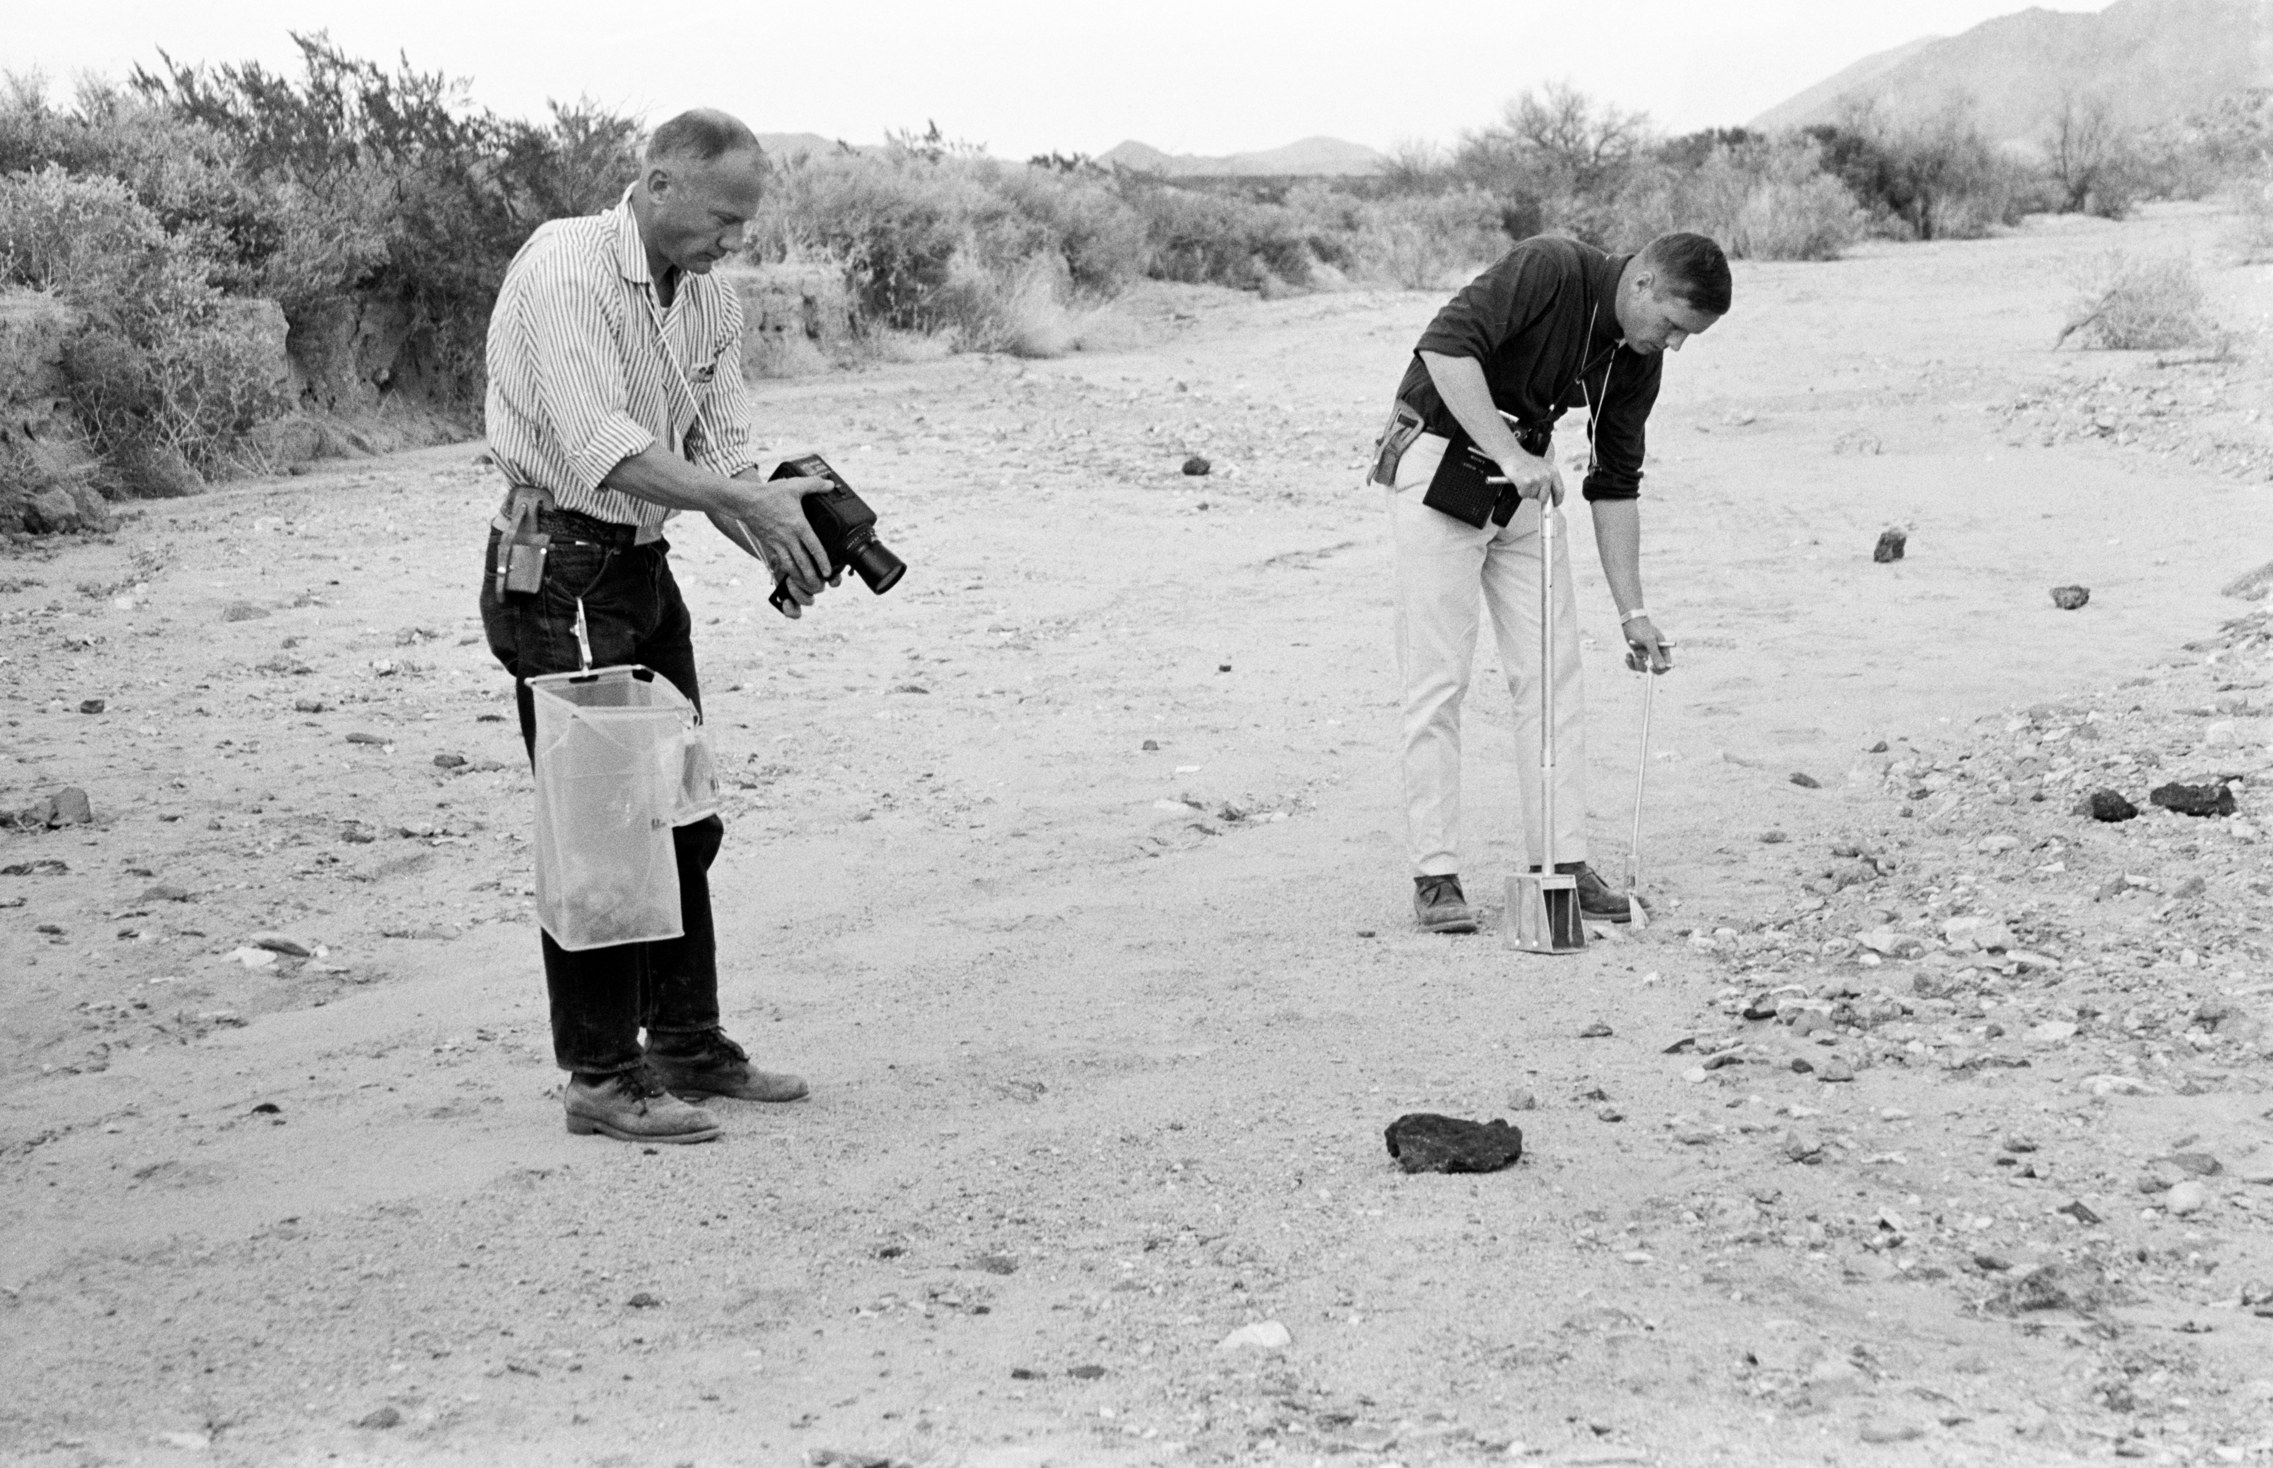 Astronauts Buzz Aldrin (L) and Neil Armstrong (R) take samples of soil in a mountainous area near Houston on Feb. 25, 1969.